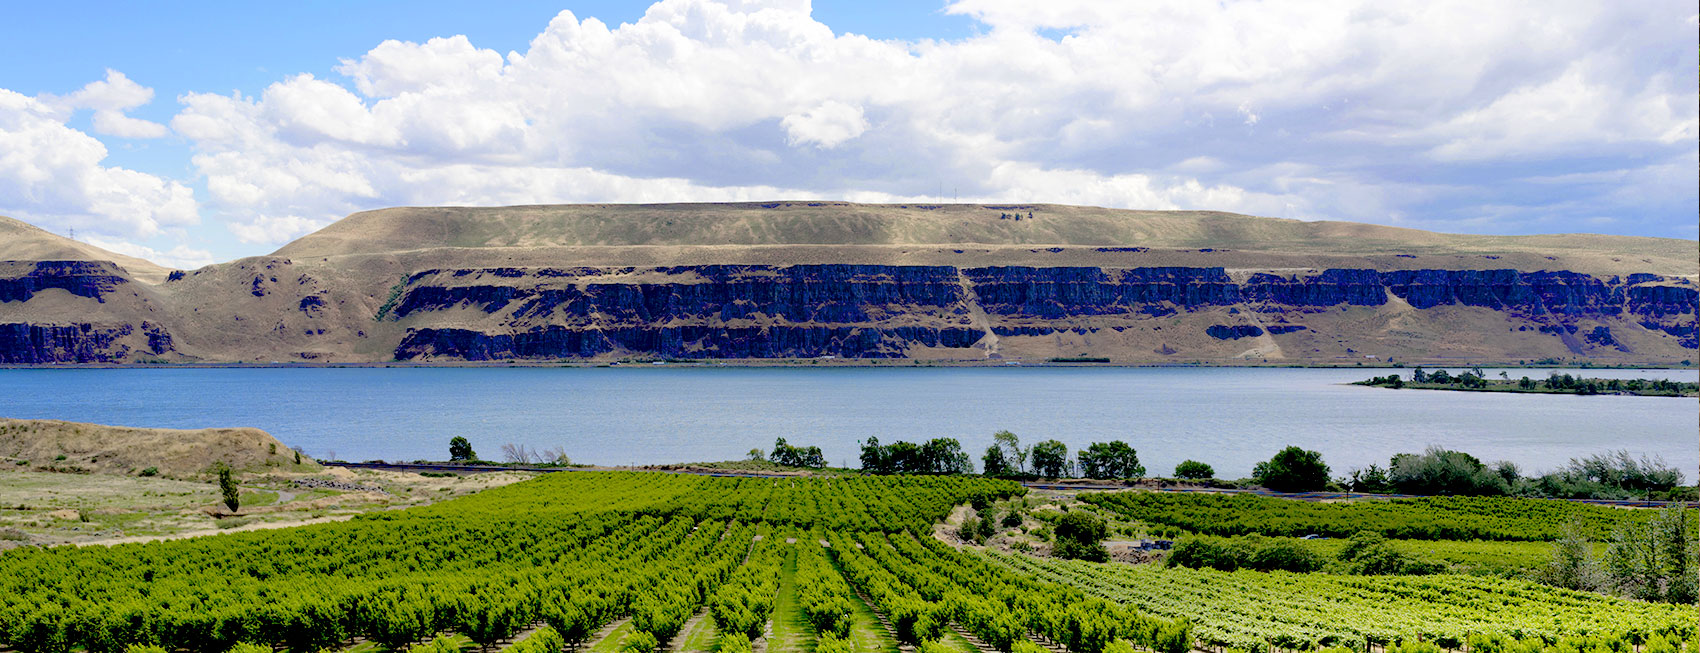 https://fwee.org/wp-content/uploads/2022/02/columbia-river-basin-orchards-hero.jpg